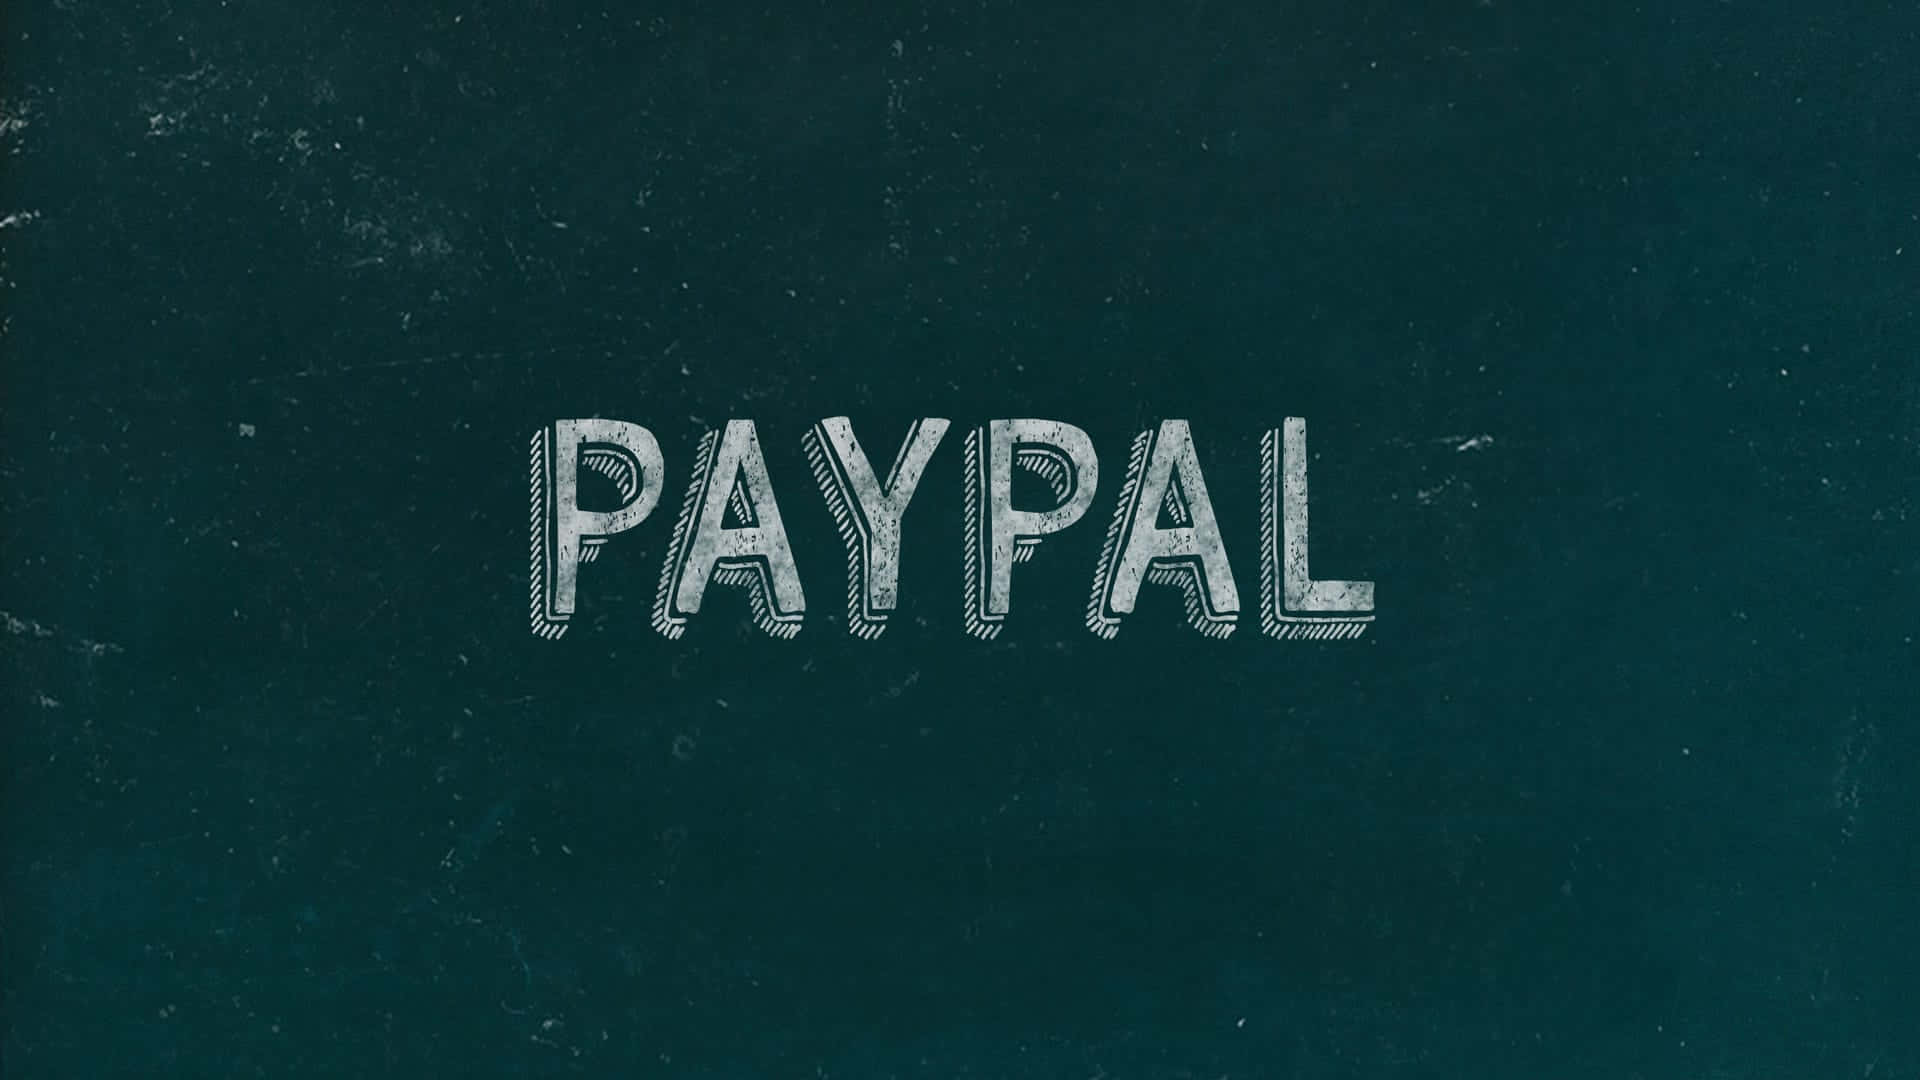 A Black And White Image Of The Word Paypal